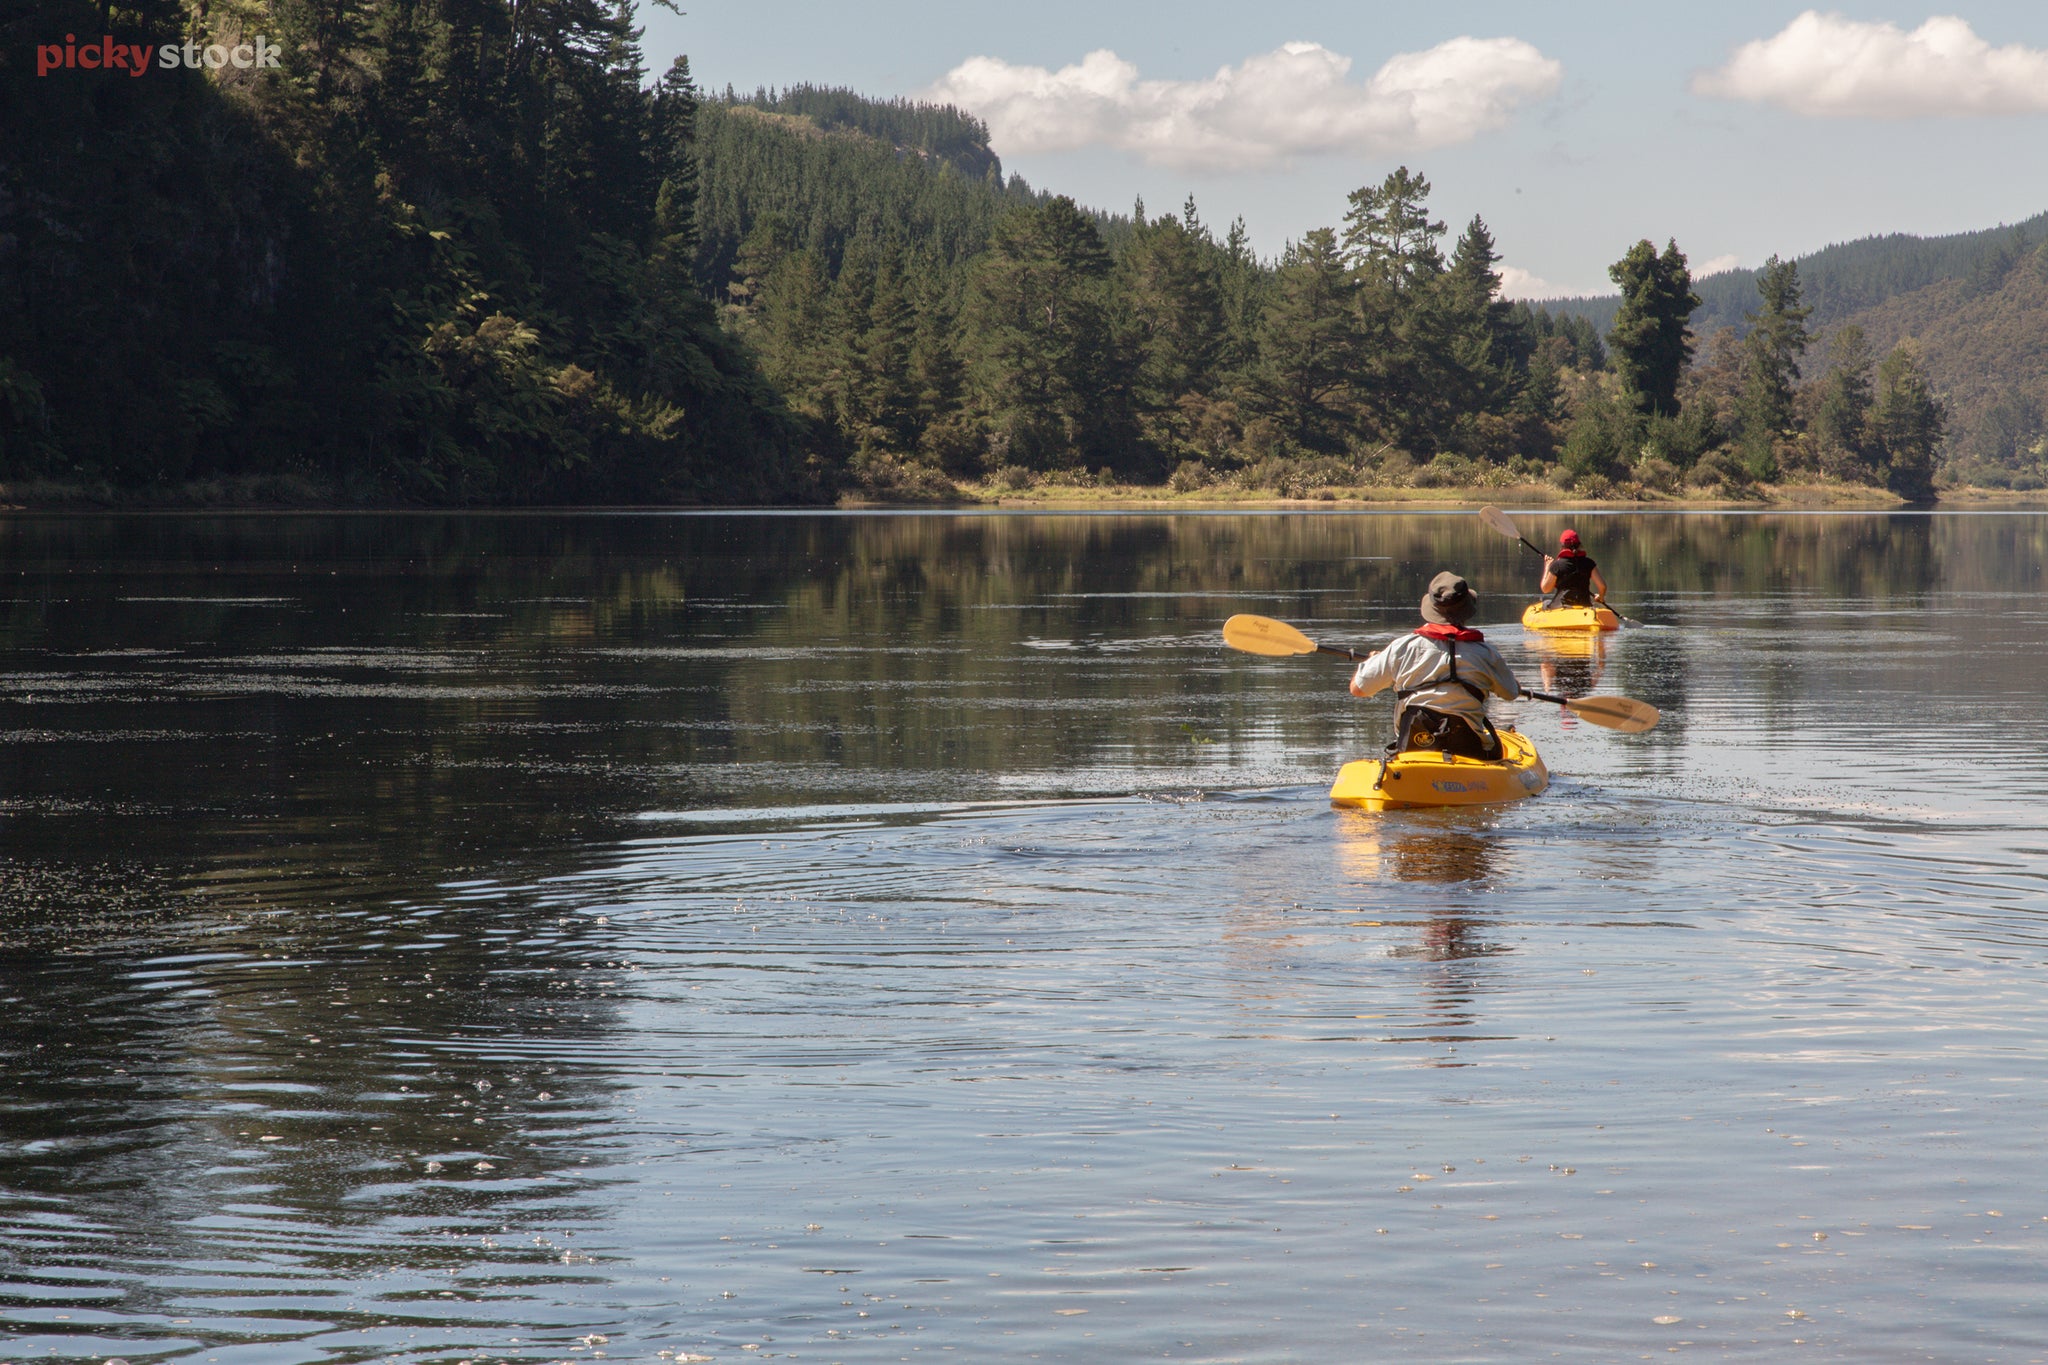 Landscape of two people paddling in yellow kayaks across a rippling body of water, the river banks full of dark green pines and ferns leaning out towards the water.